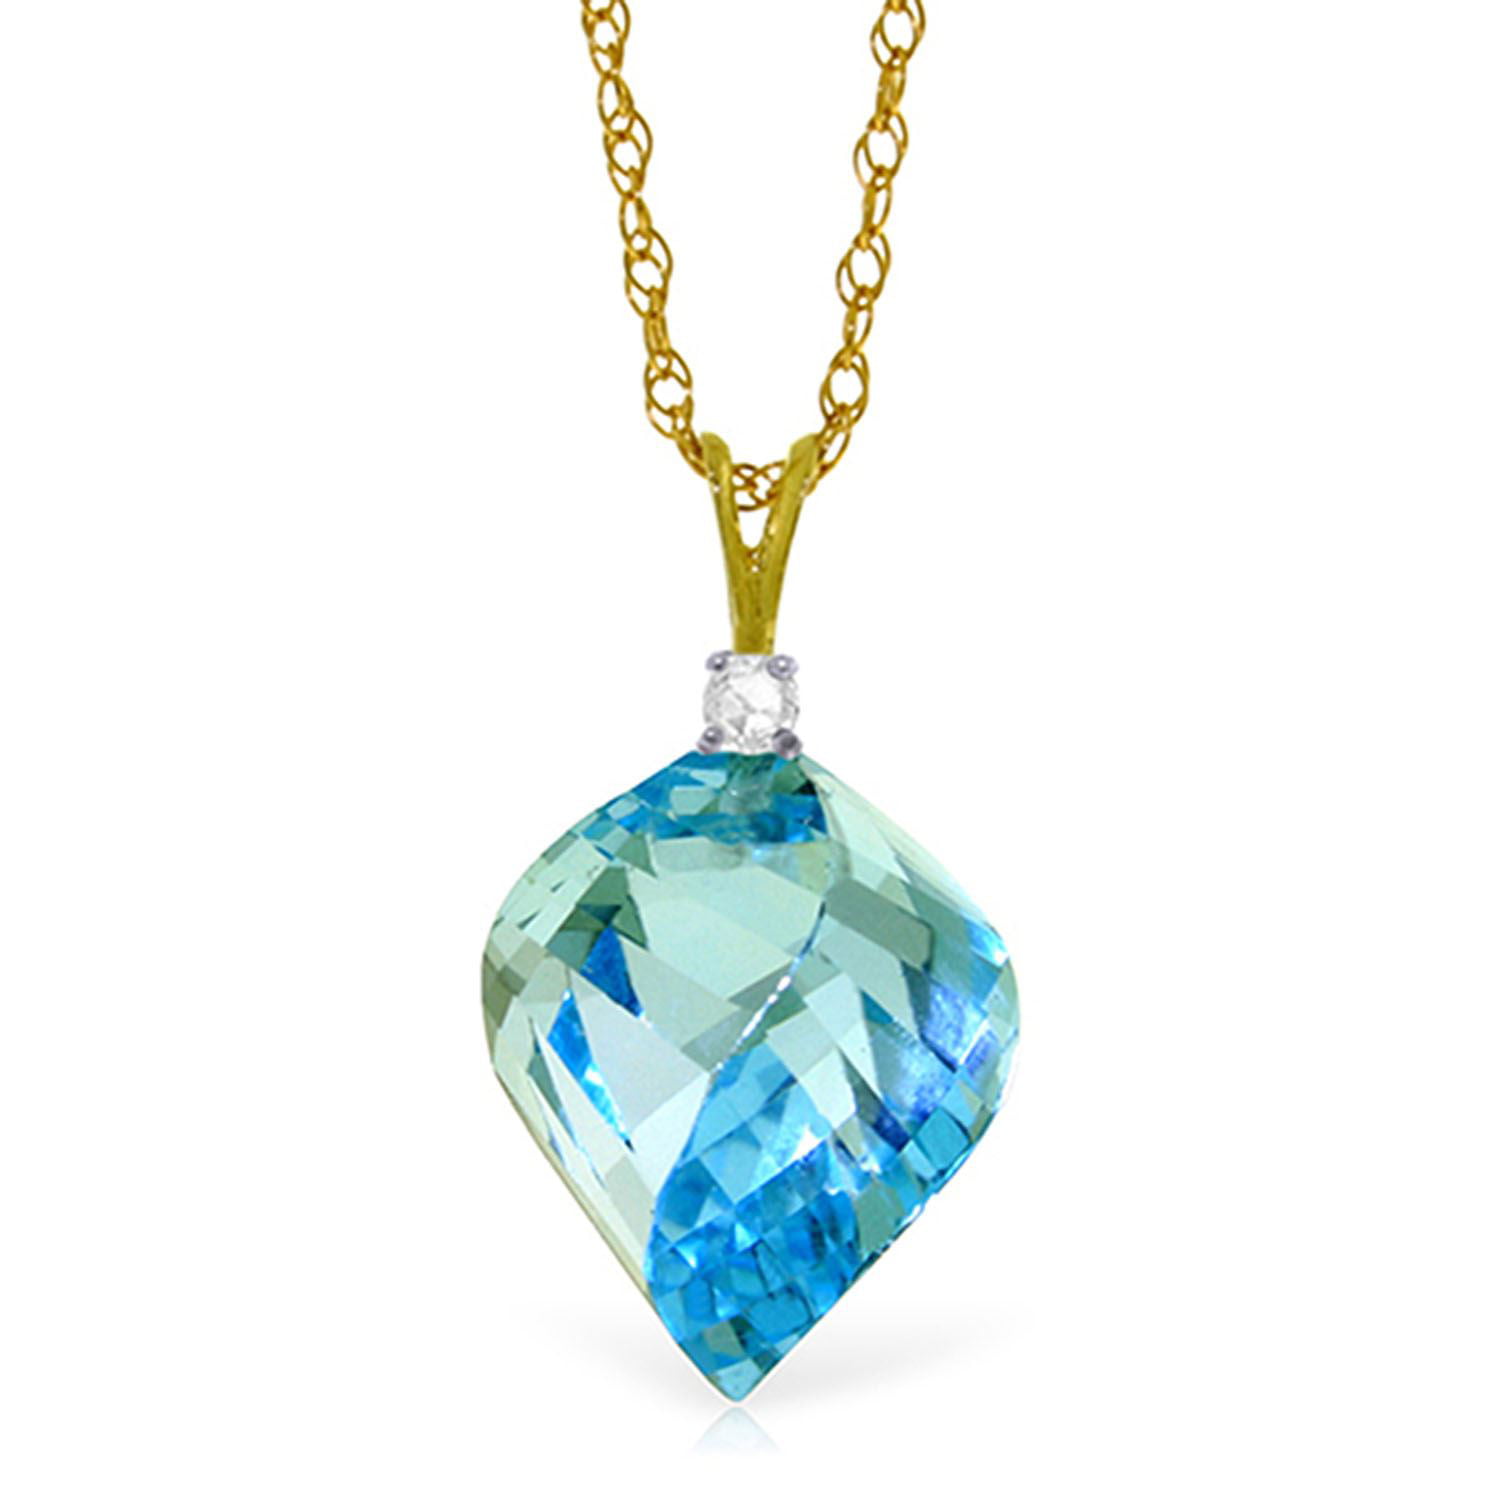 ALARRI 1.4 Carat 14K Solid White Gold Hearts Necklace Natural Blue Topaz Peridot with 20 Inch Chain Length